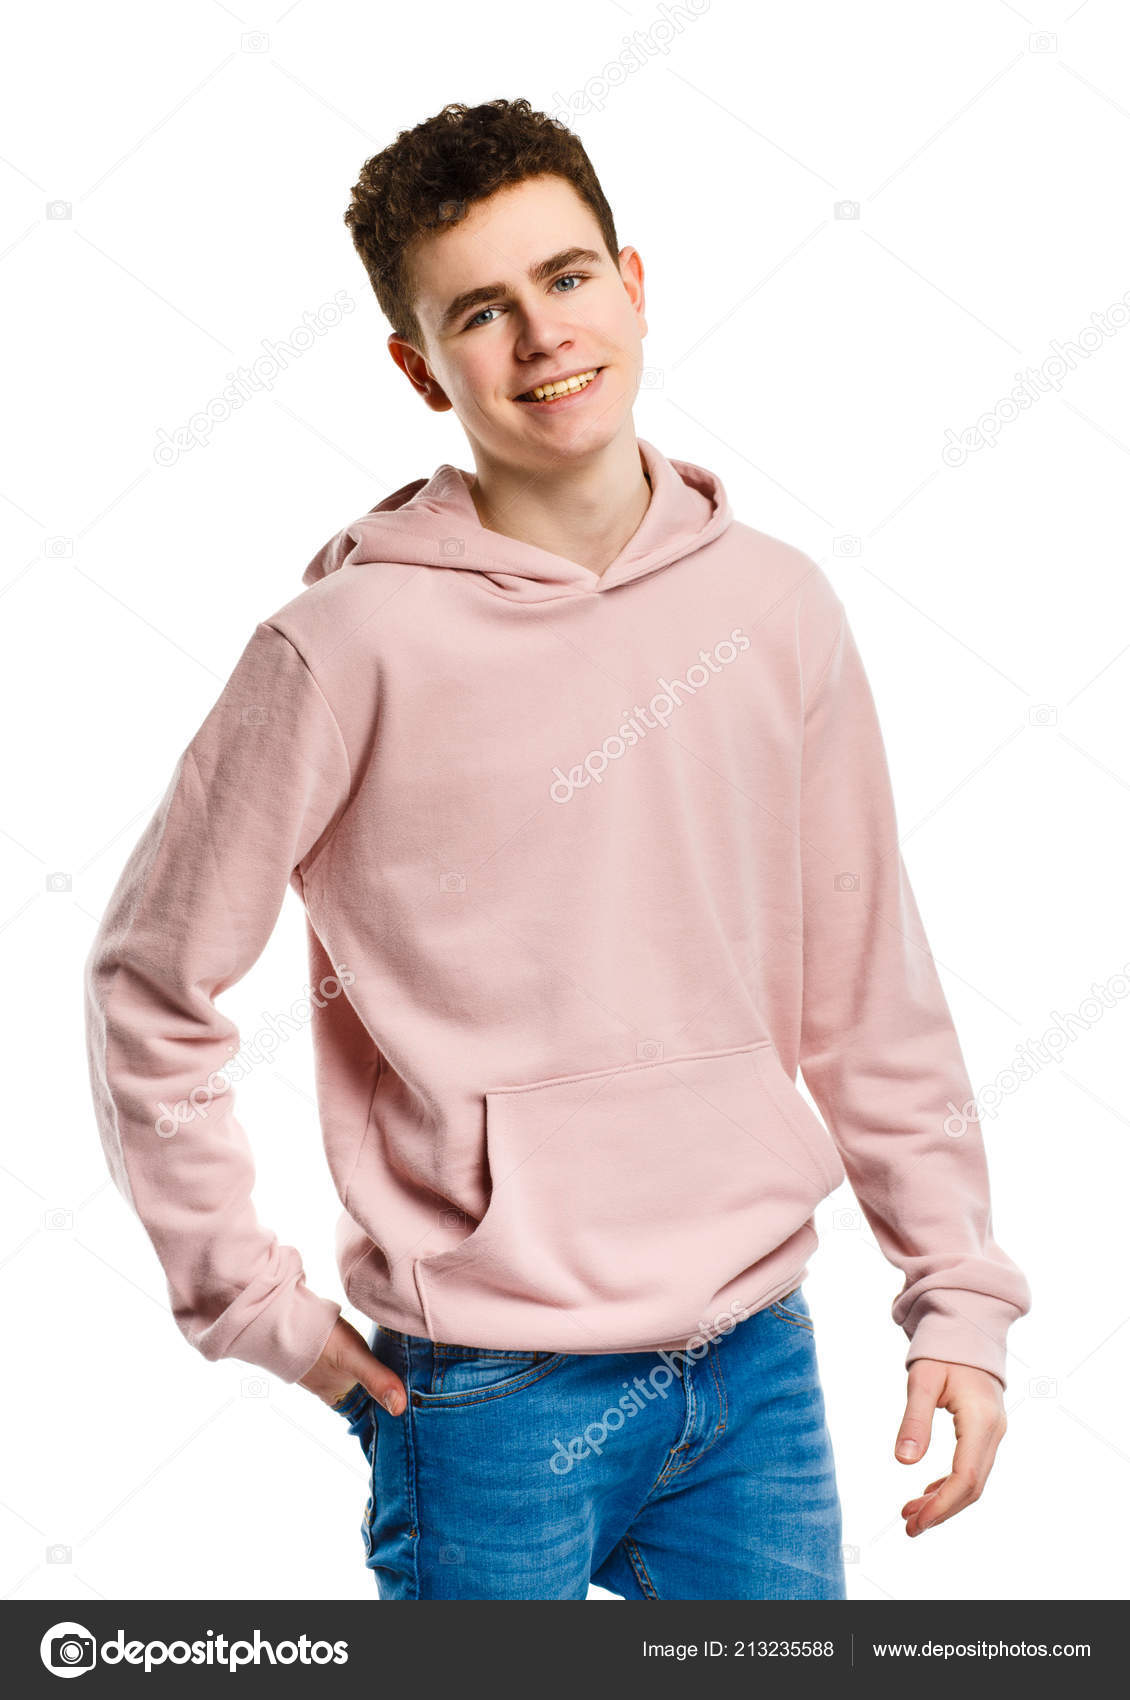 pink jeans for boys